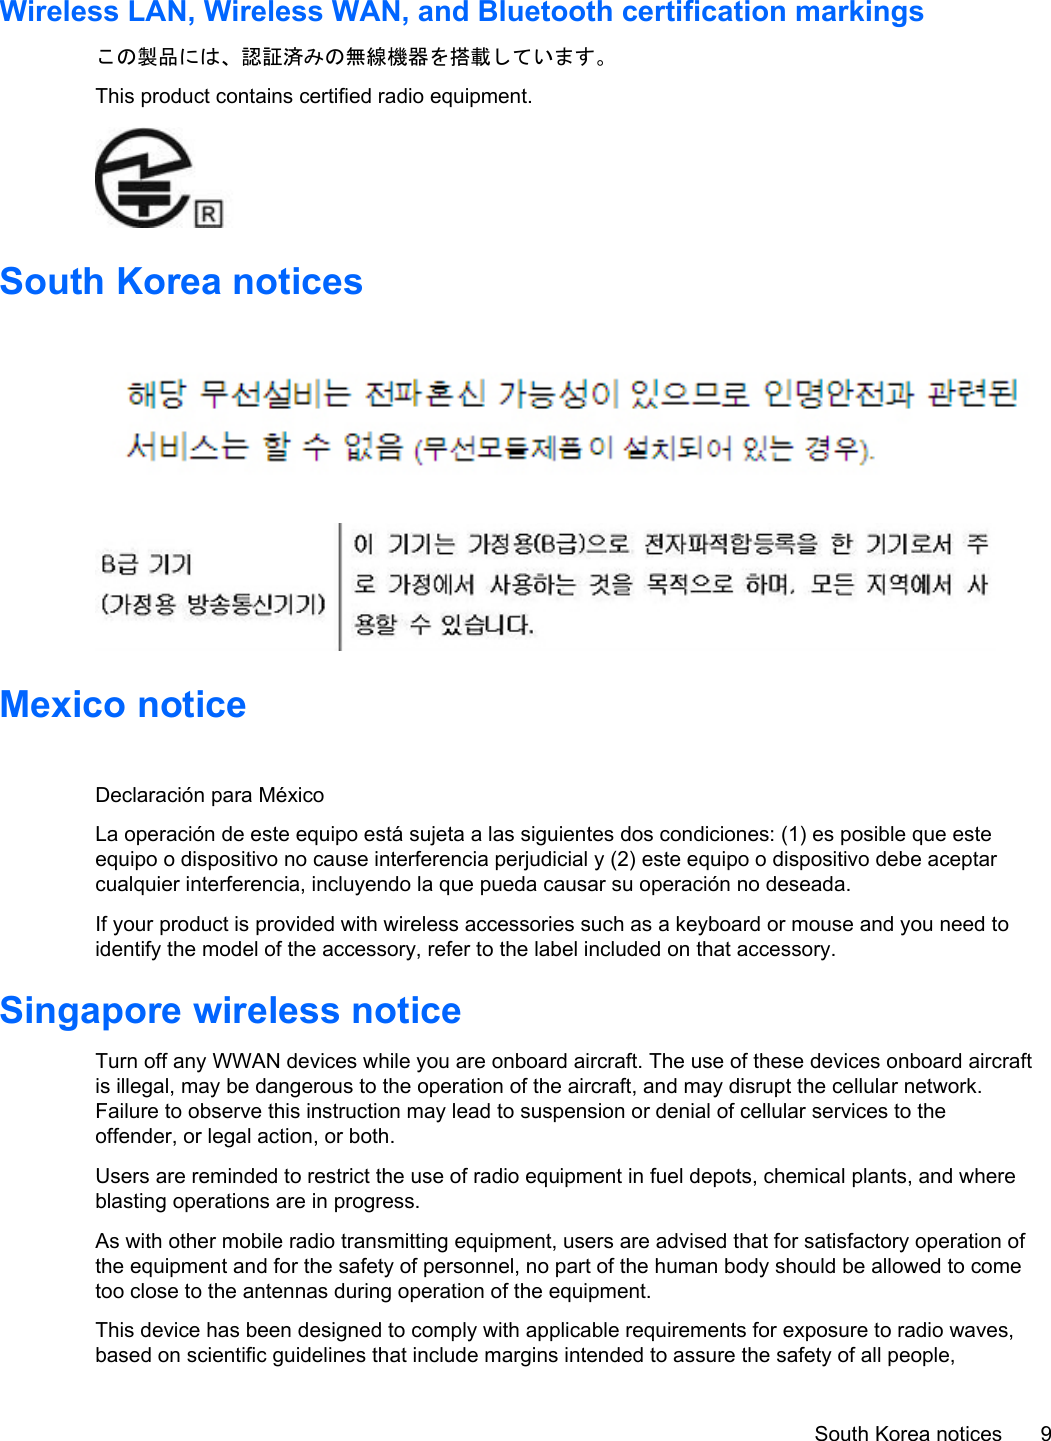 Wireless LAN, Wireless WAN, and Bluetooth certification markingsこの製品には、認証済みの無線機器を搭載しています。This product contains certified radio equipment.South Korea noticesMexico noticeDeclaración para MéxicoLa operación de este equipo está sujeta a las siguientes dos condiciones: (1) es posible que esteequipo o dispositivo no cause interferencia perjudicial y (2) este equipo o dispositivo debe aceptarcualquier interferencia, incluyendo la que pueda causar su operación no deseada.If your product is provided with wireless accessories such as a keyboard or mouse and you need toidentify the model of the accessory, refer to the label included on that accessory.Singapore wireless noticeTurn off any WWAN devices while you are onboard aircraft. The use of these devices onboard aircraftis illegal, may be dangerous to the operation of the aircraft, and may disrupt the cellular network.Failure to observe this instruction may lead to suspension or denial of cellular services to theoffender, or legal action, or both.Users are reminded to restrict the use of radio equipment in fuel depots, chemical plants, and whereblasting operations are in progress.As with other mobile radio transmitting equipment, users are advised that for satisfactory operation ofthe equipment and for the safety of personnel, no part of the human body should be allowed to cometoo close to the antennas during operation of the equipment.This device has been designed to comply with applicable requirements for exposure to radio waves,based on scientific guidelines that include margins intended to assure the safety of all people,South Korea notices 9